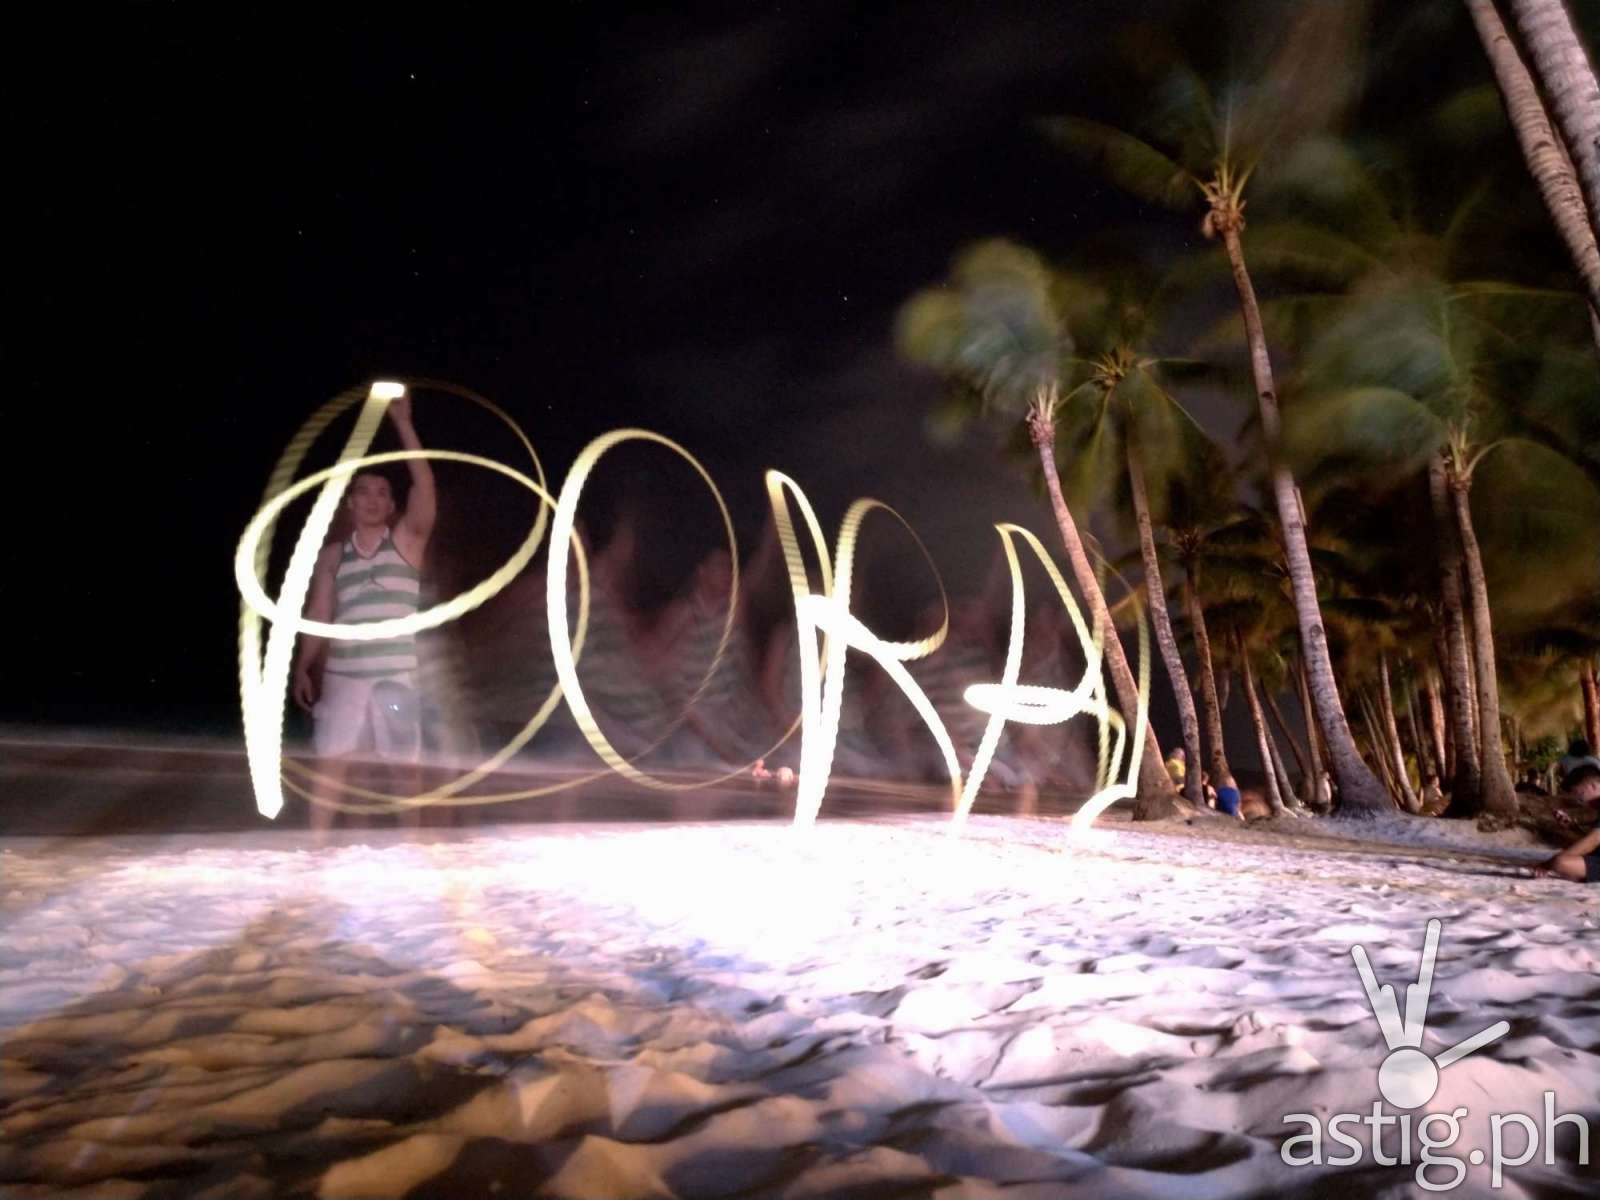 Light Painting - Boracay Philippines re-opening smartphone photo taken on an ASUS ZenFone 5 by Den Uy of TechKuya